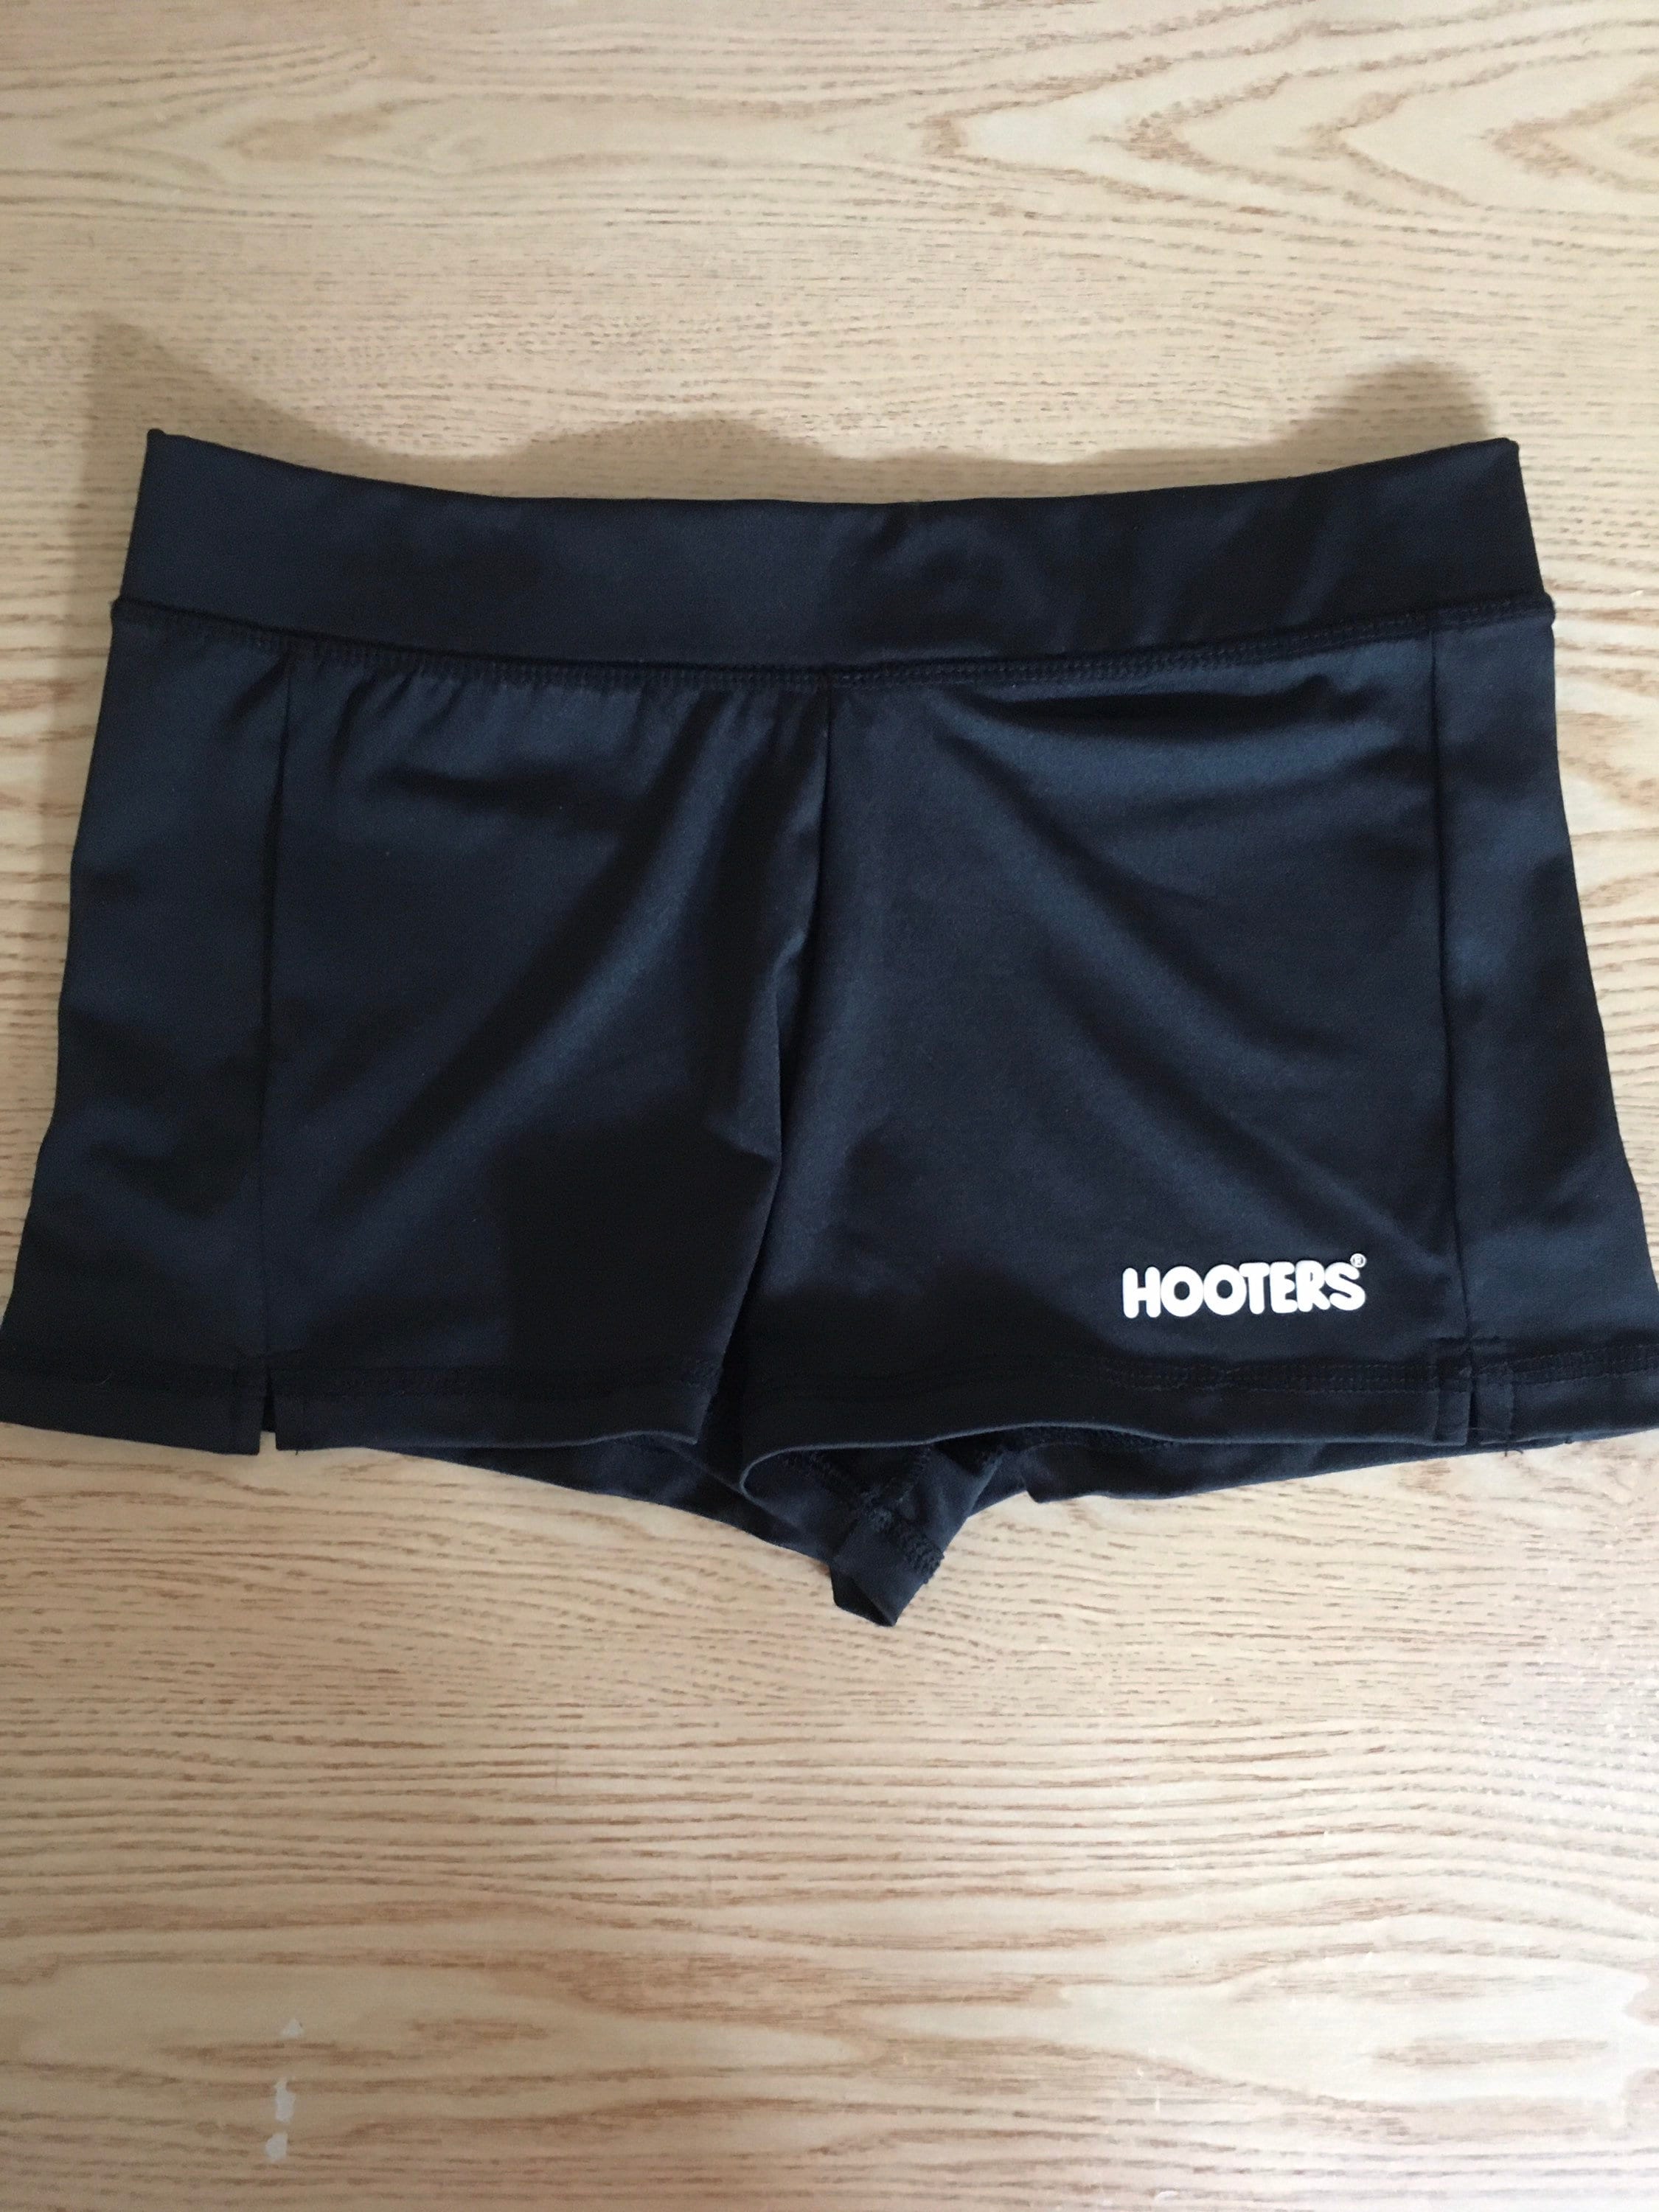 New Rare Sexy Hooters Girl Uniform Shorts Stretchy Soft Size Xsmall -   Canada